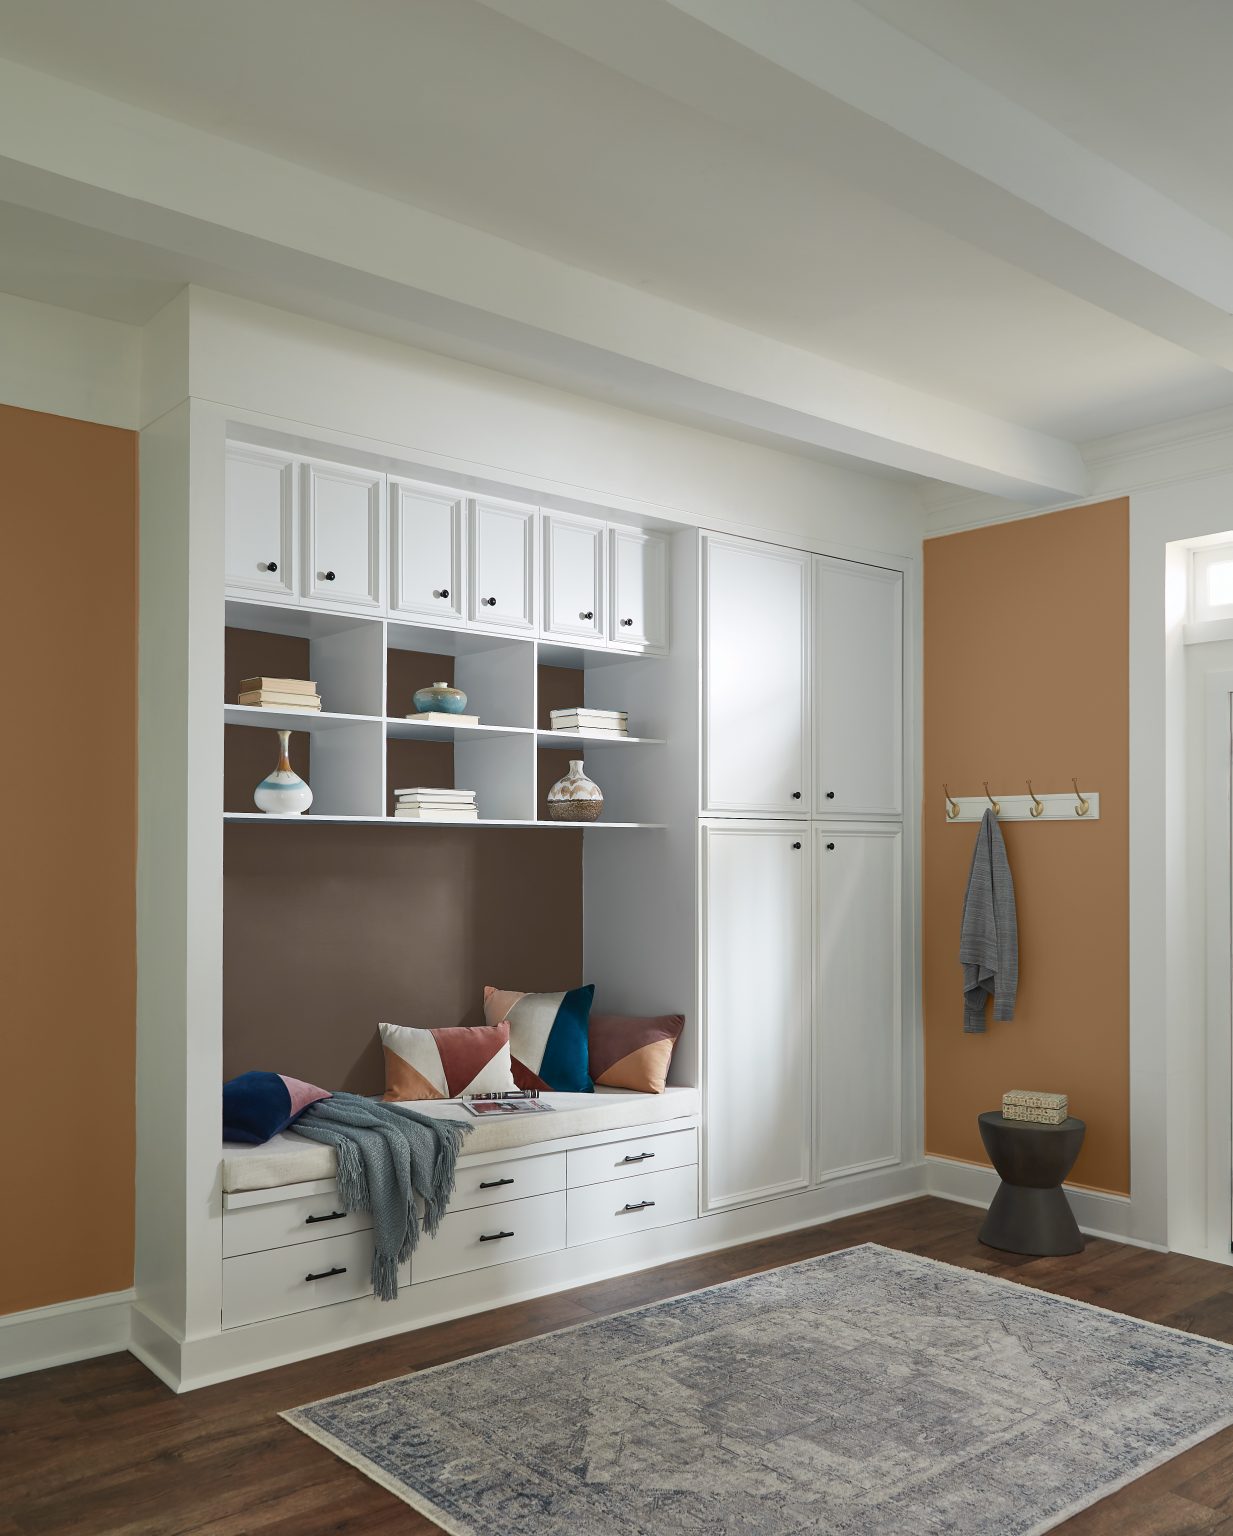 An entryway with walls painted in a gold-brown, with a white built-in closet and seating bench